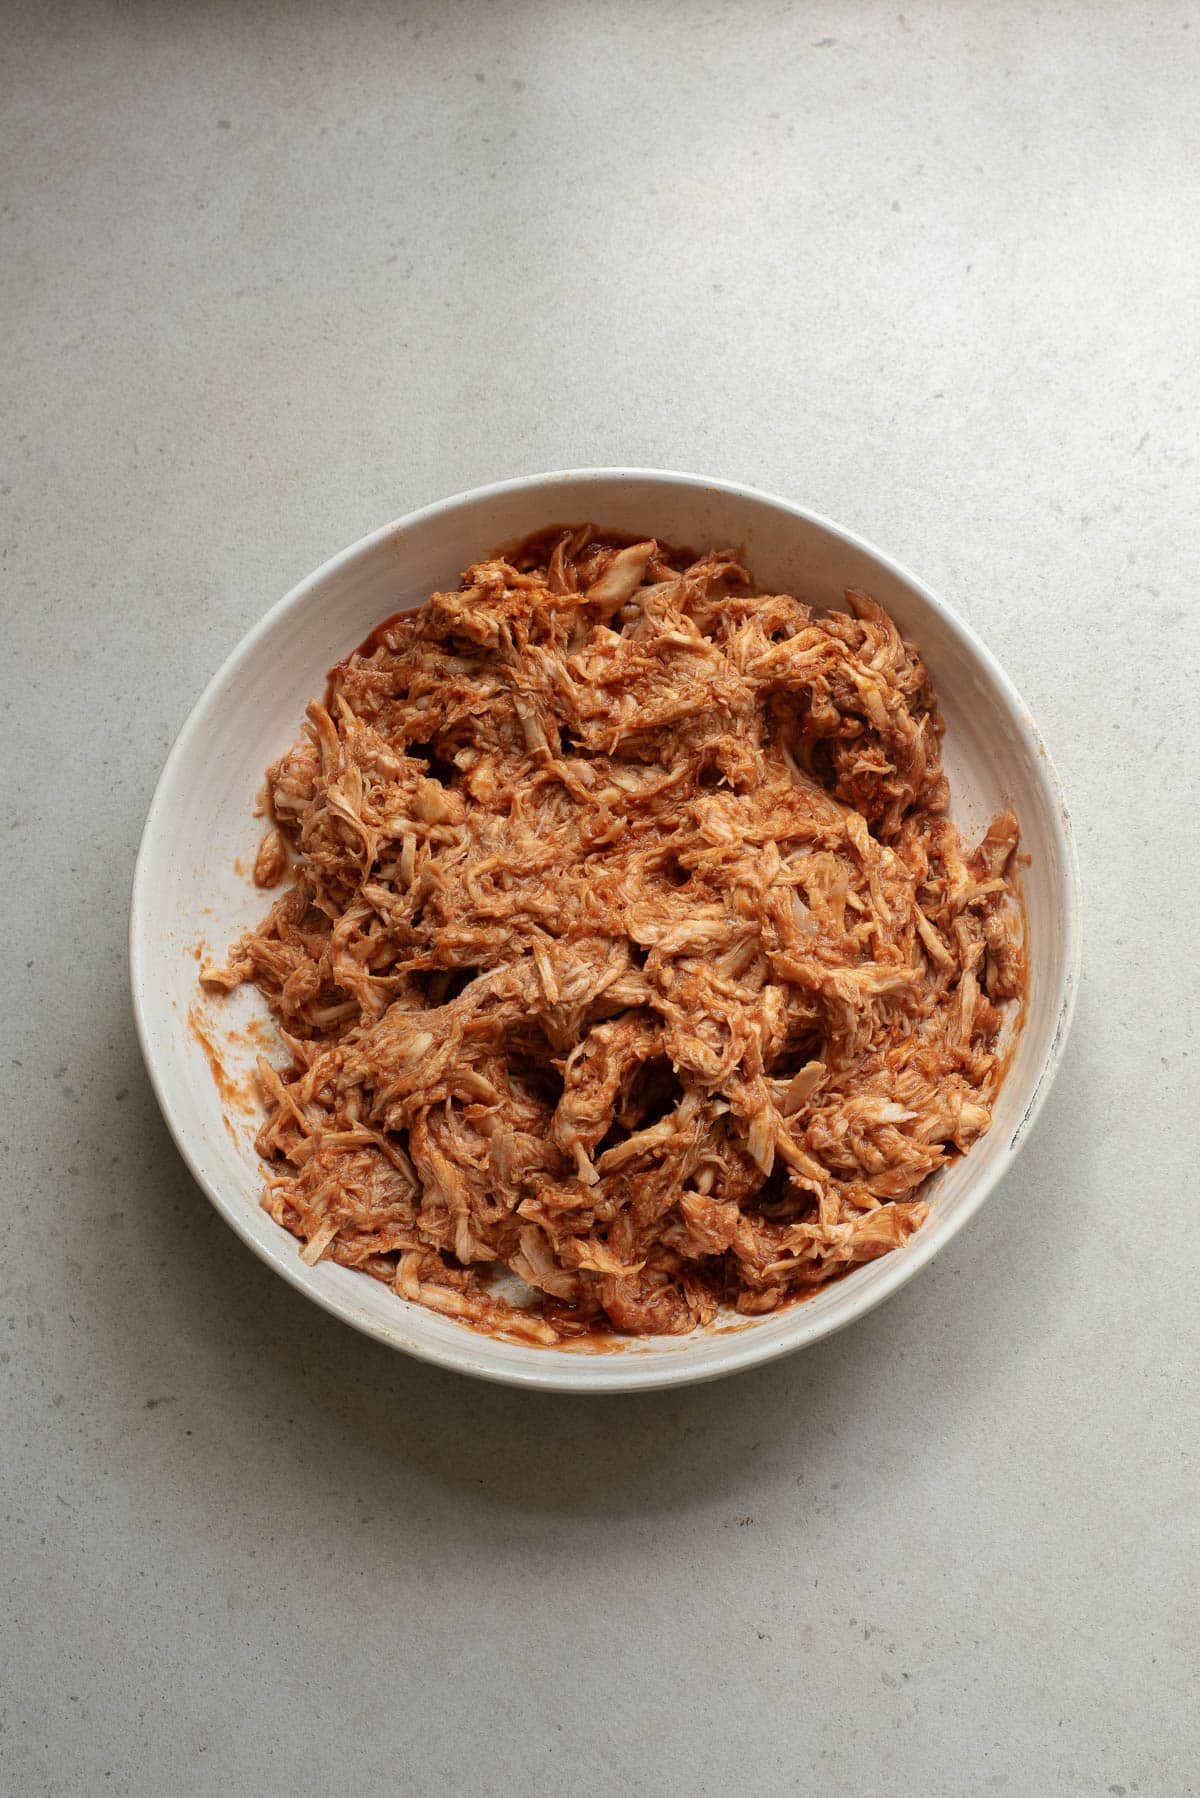 Shredded barbecue chicken in a white bowl.